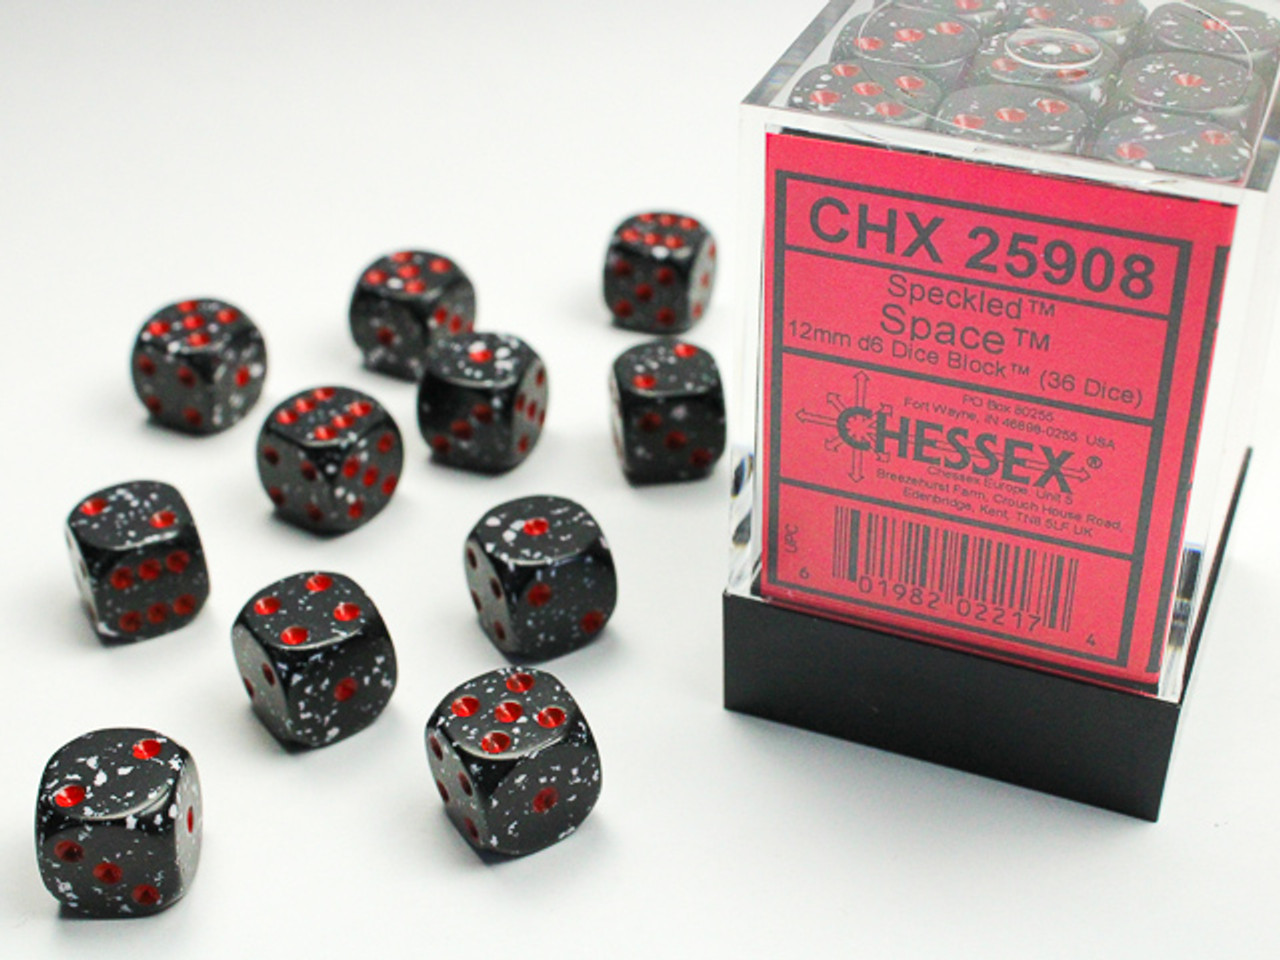 25908 - Speckled® 12mm d6 Space™ Dice Block™ (36 dice)